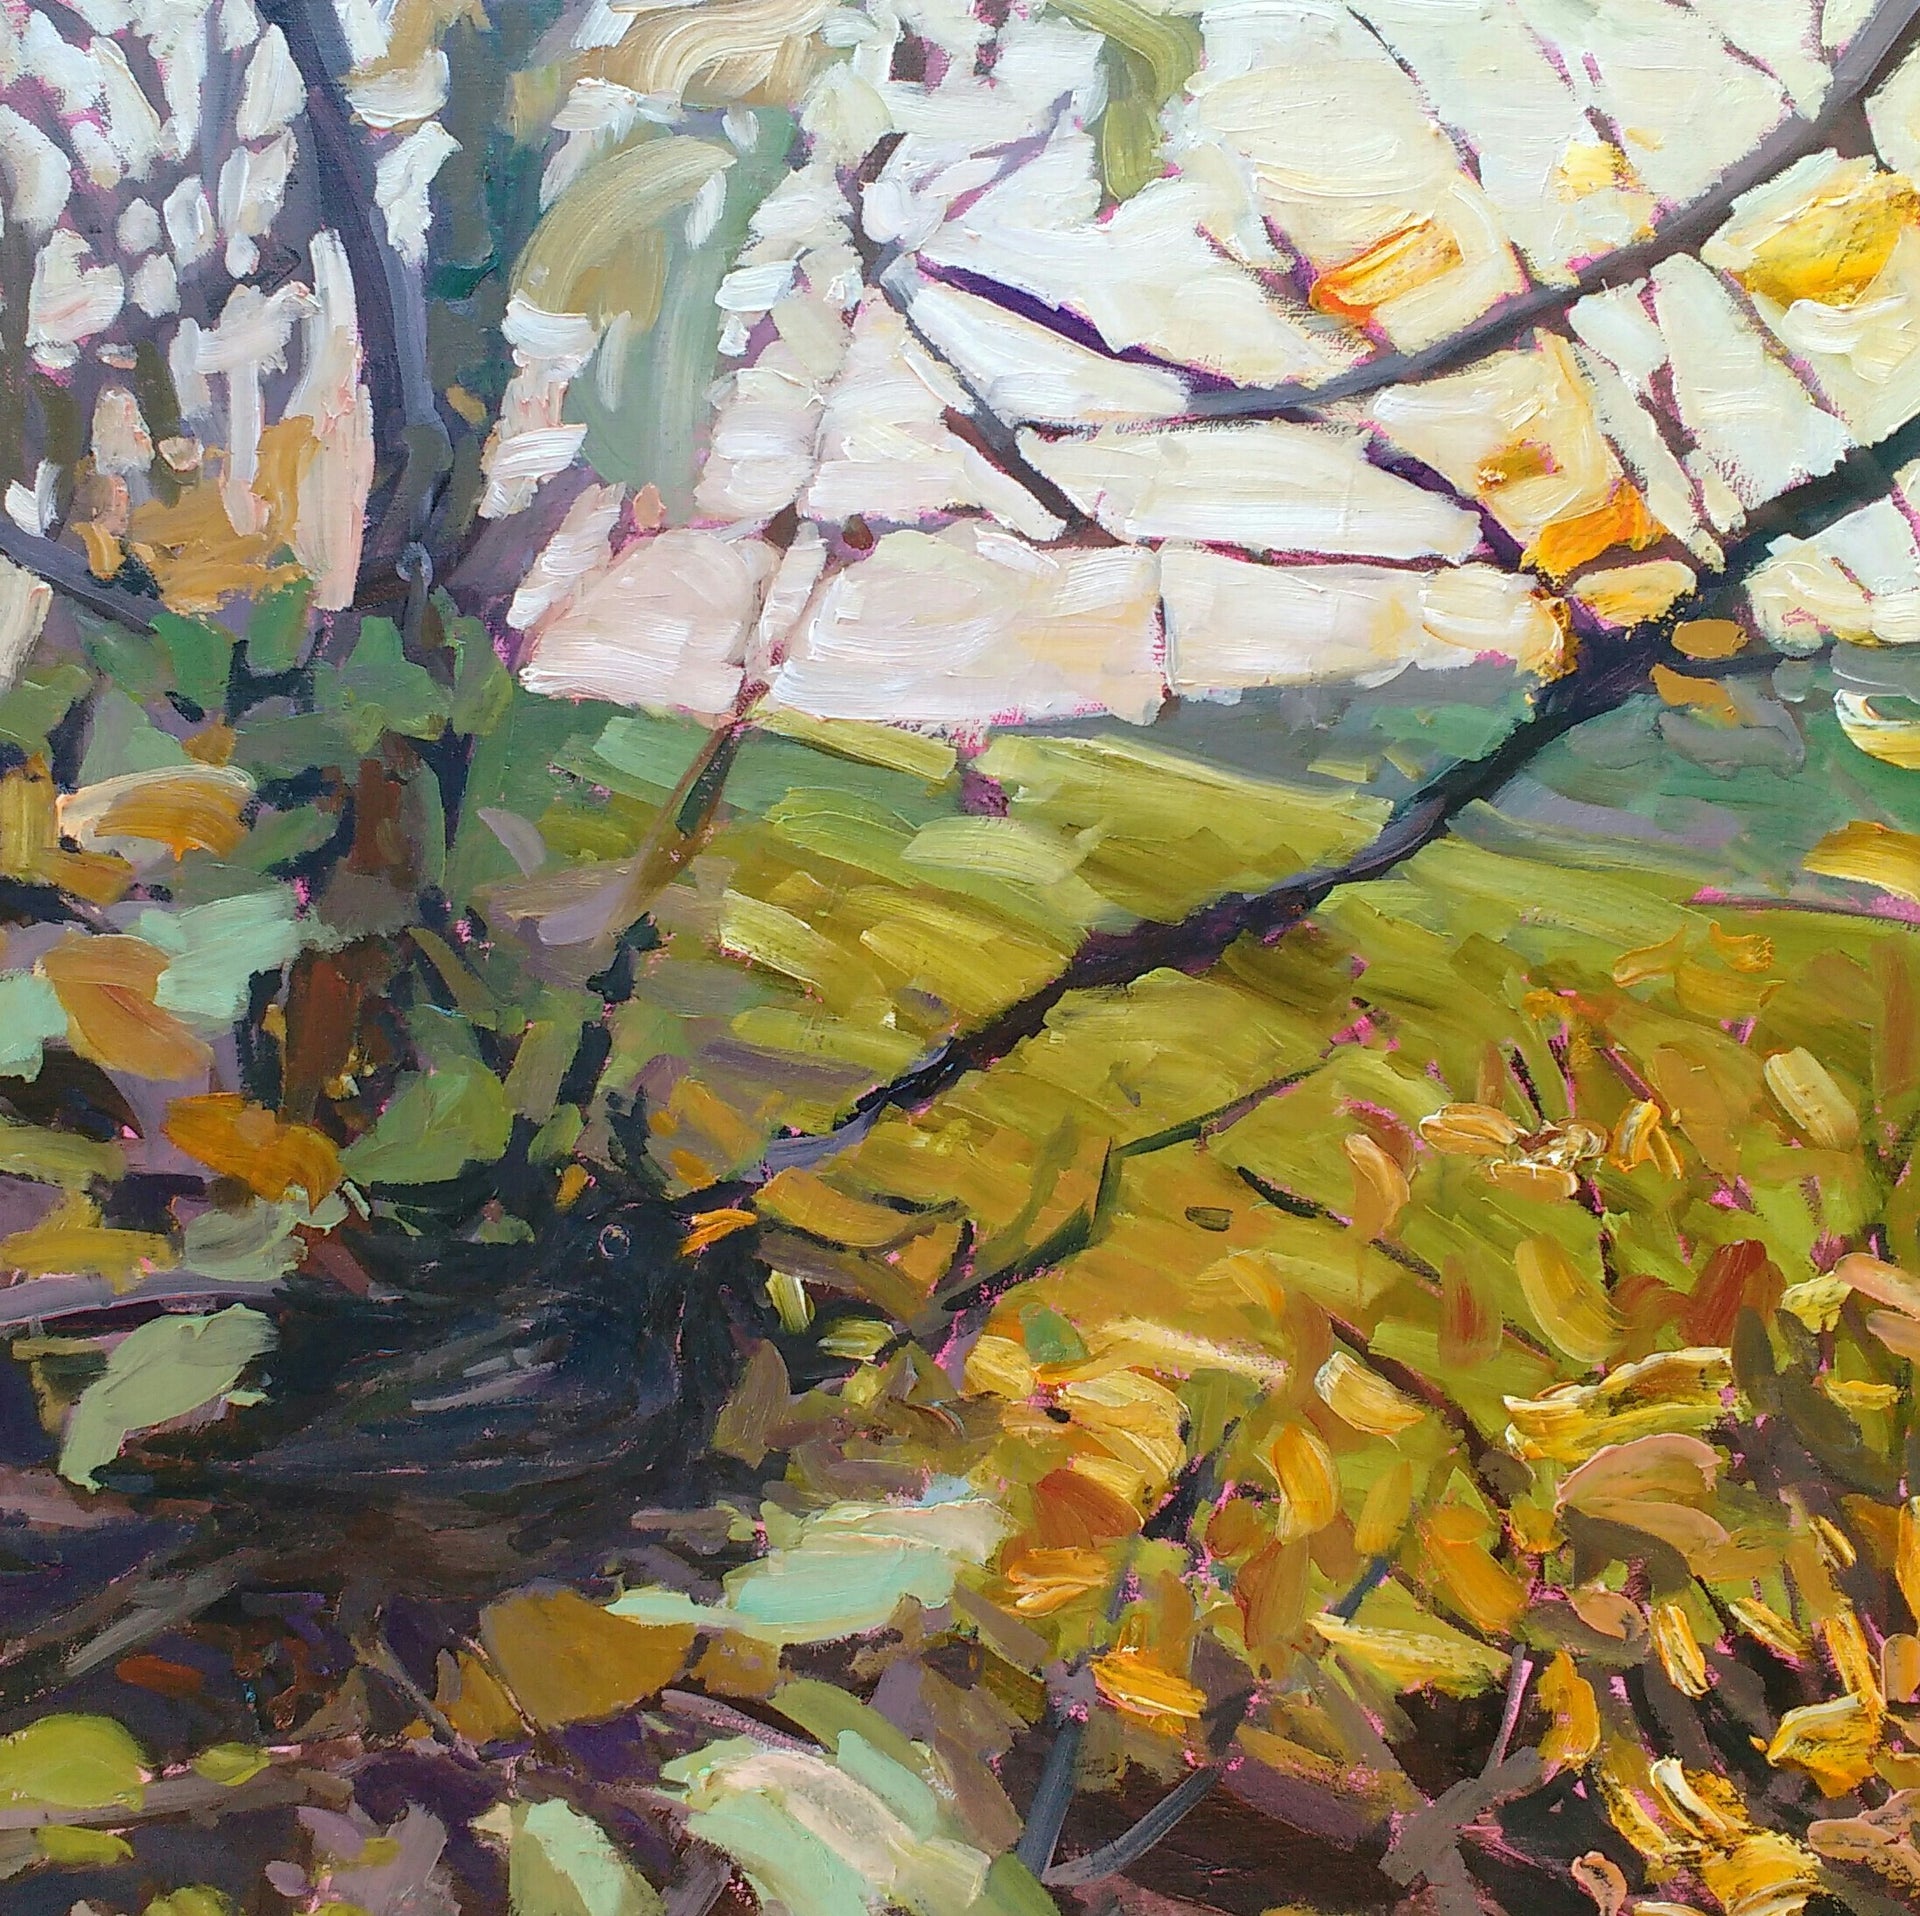 Oil painting by Jill Hudson is greens and yellows of a Cornish Spring hedge